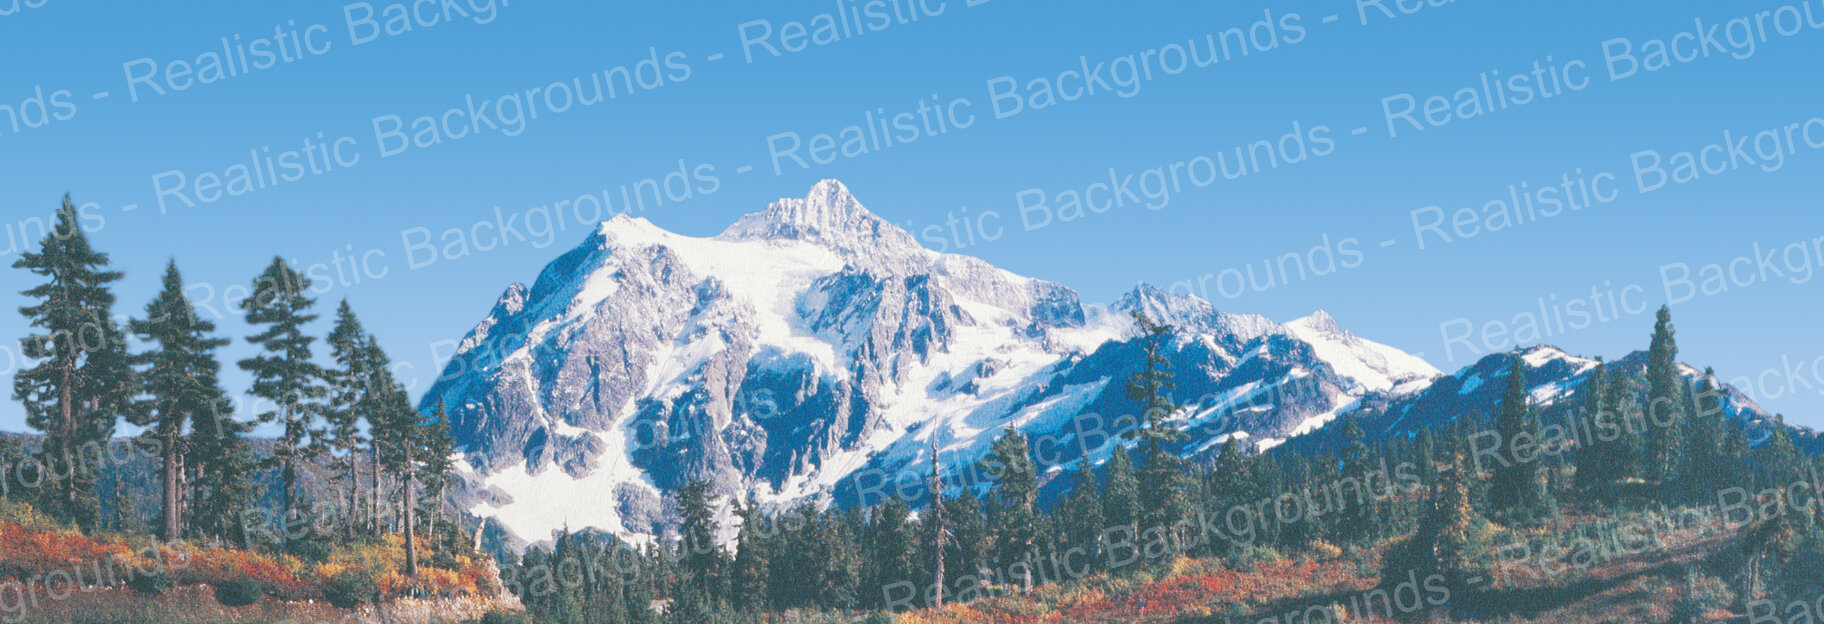 Realistic Backgrounds HO MOUNTAINS IN AUTUMN 14X38 Shipped Rolled Item 704-16 Left